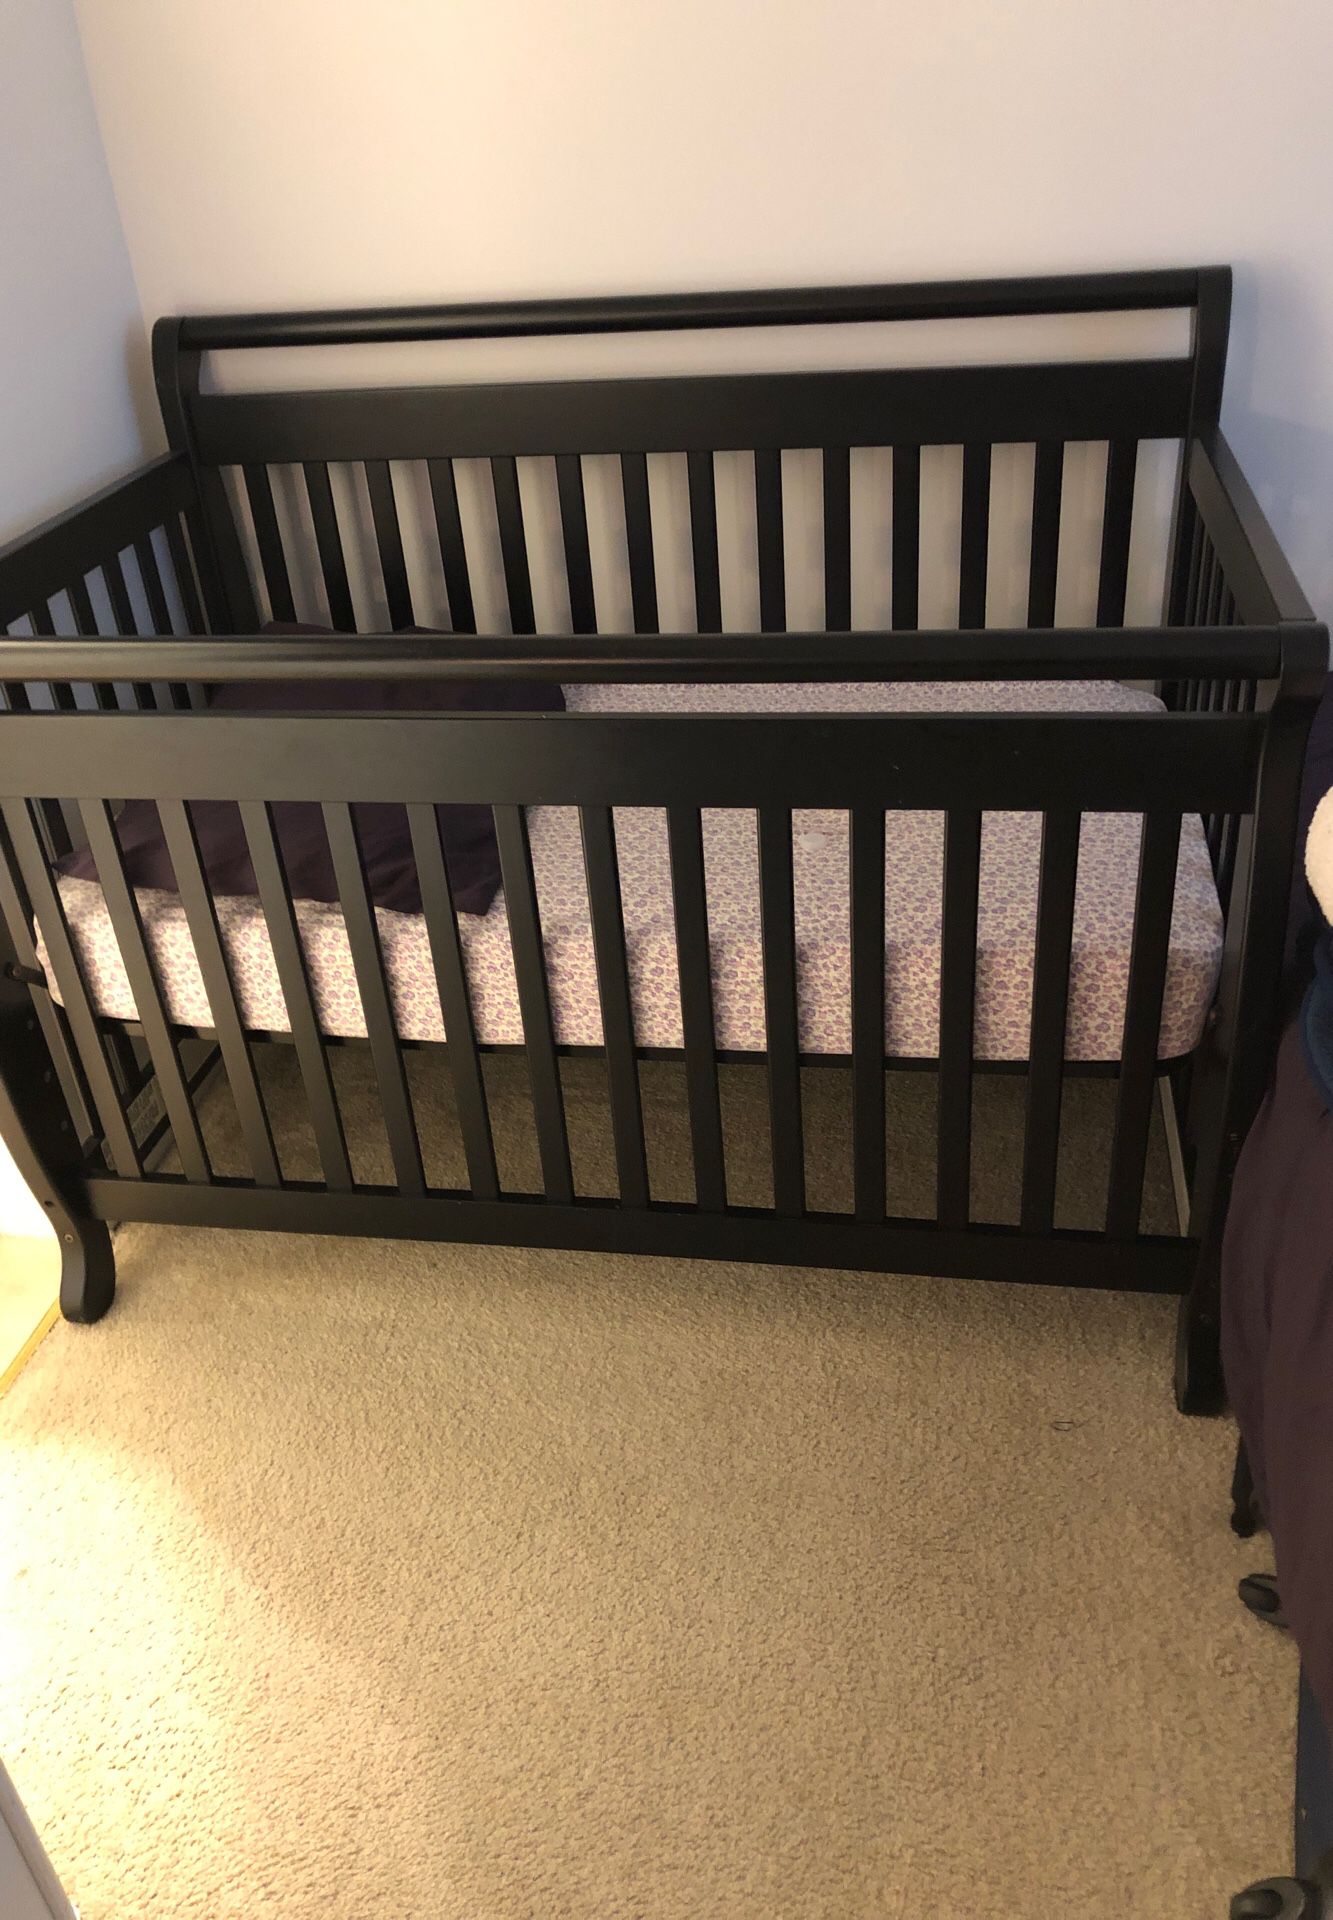 Crib, dresser, changing table and baby stuff